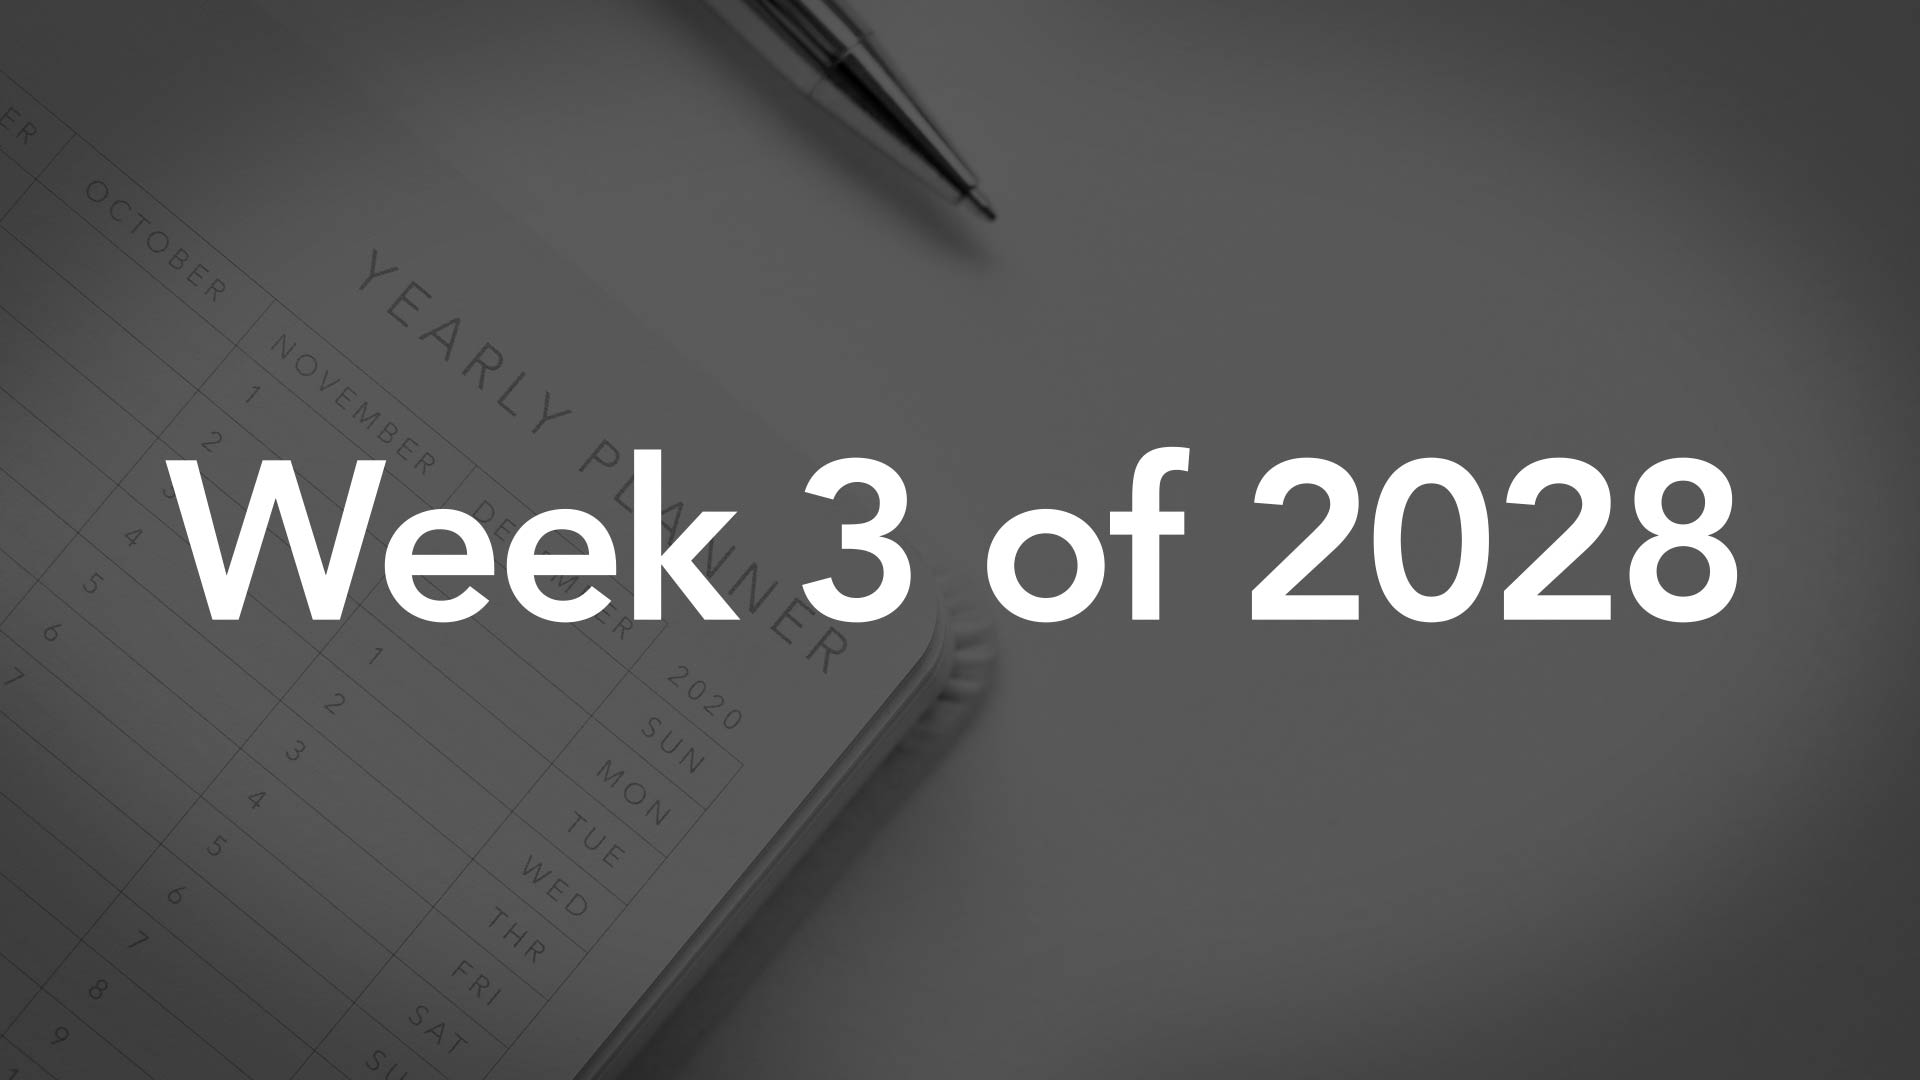 Title Image for Week 3 of 2028